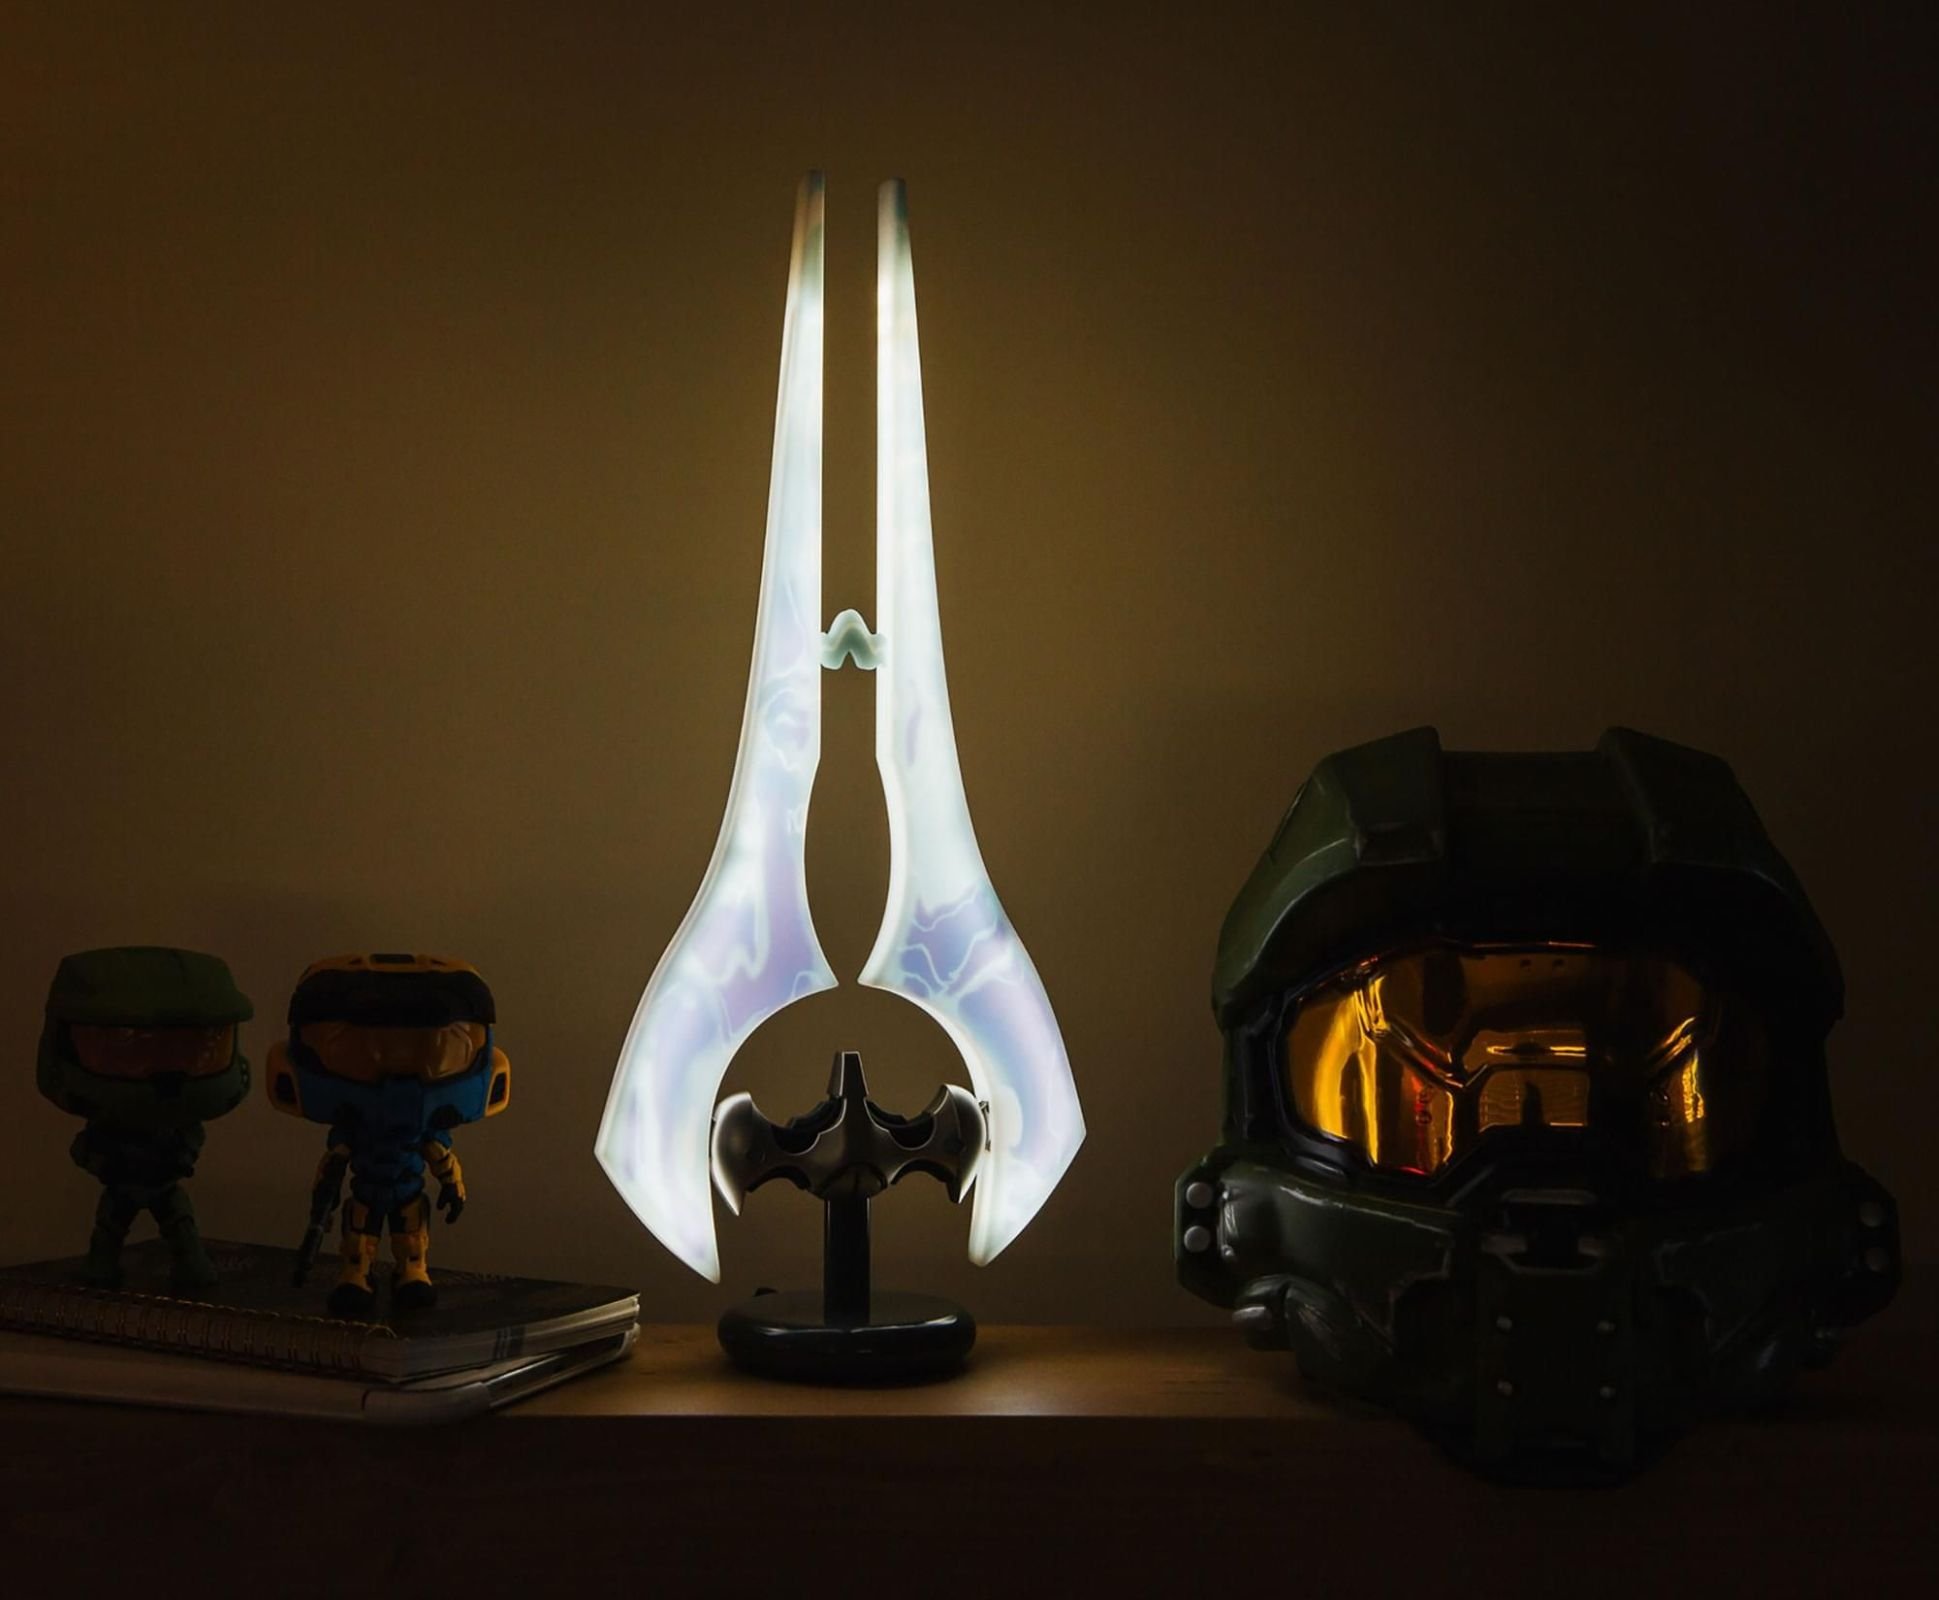 Celebrate HALO INFINITE With These Sick Looking Energy Sword Lamps ...